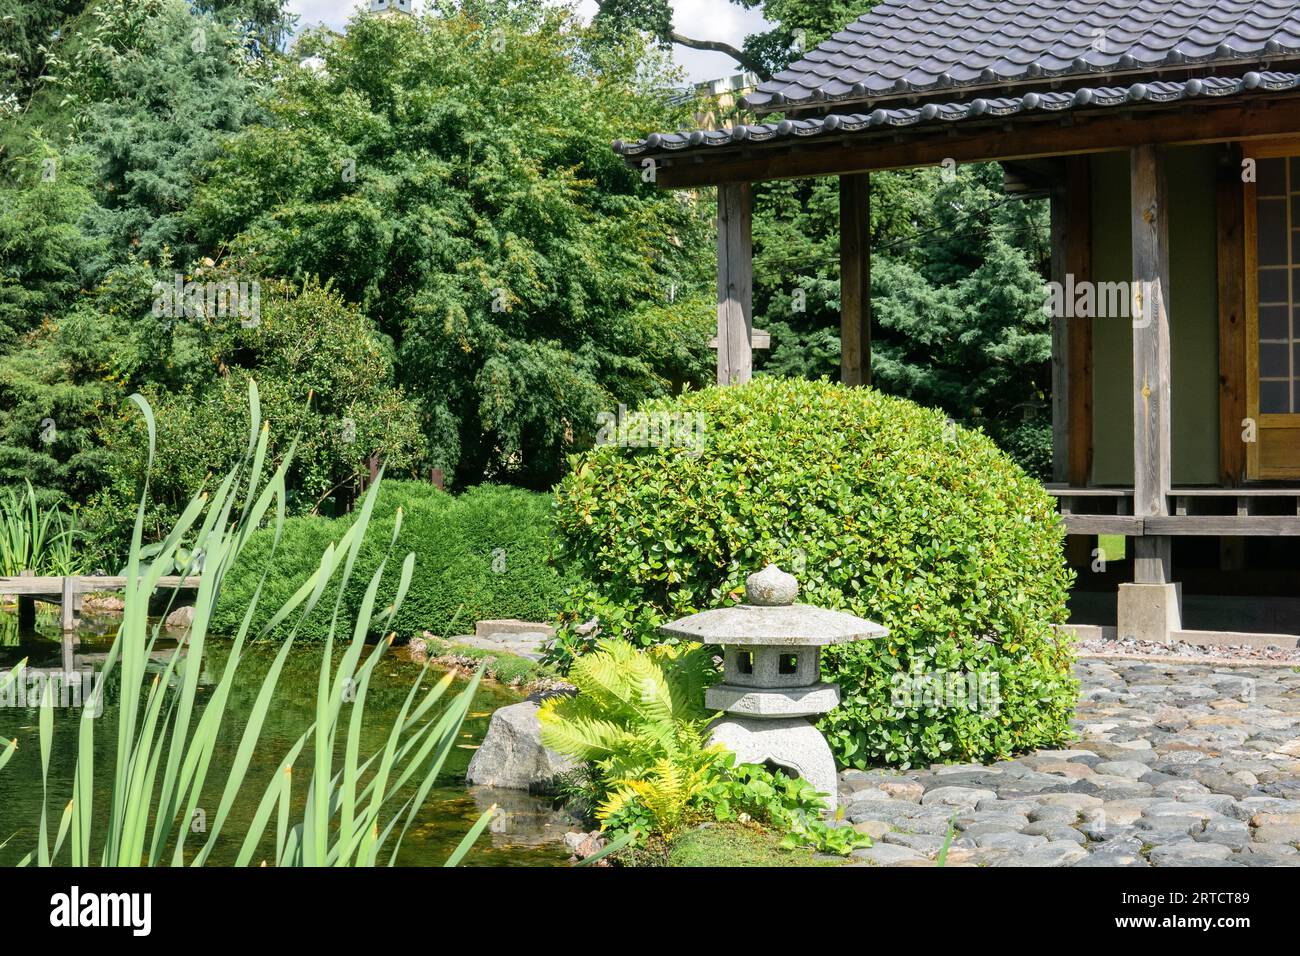 stone lantern on the shore of a pond in a Japanese garden with a tea house Stock Photo